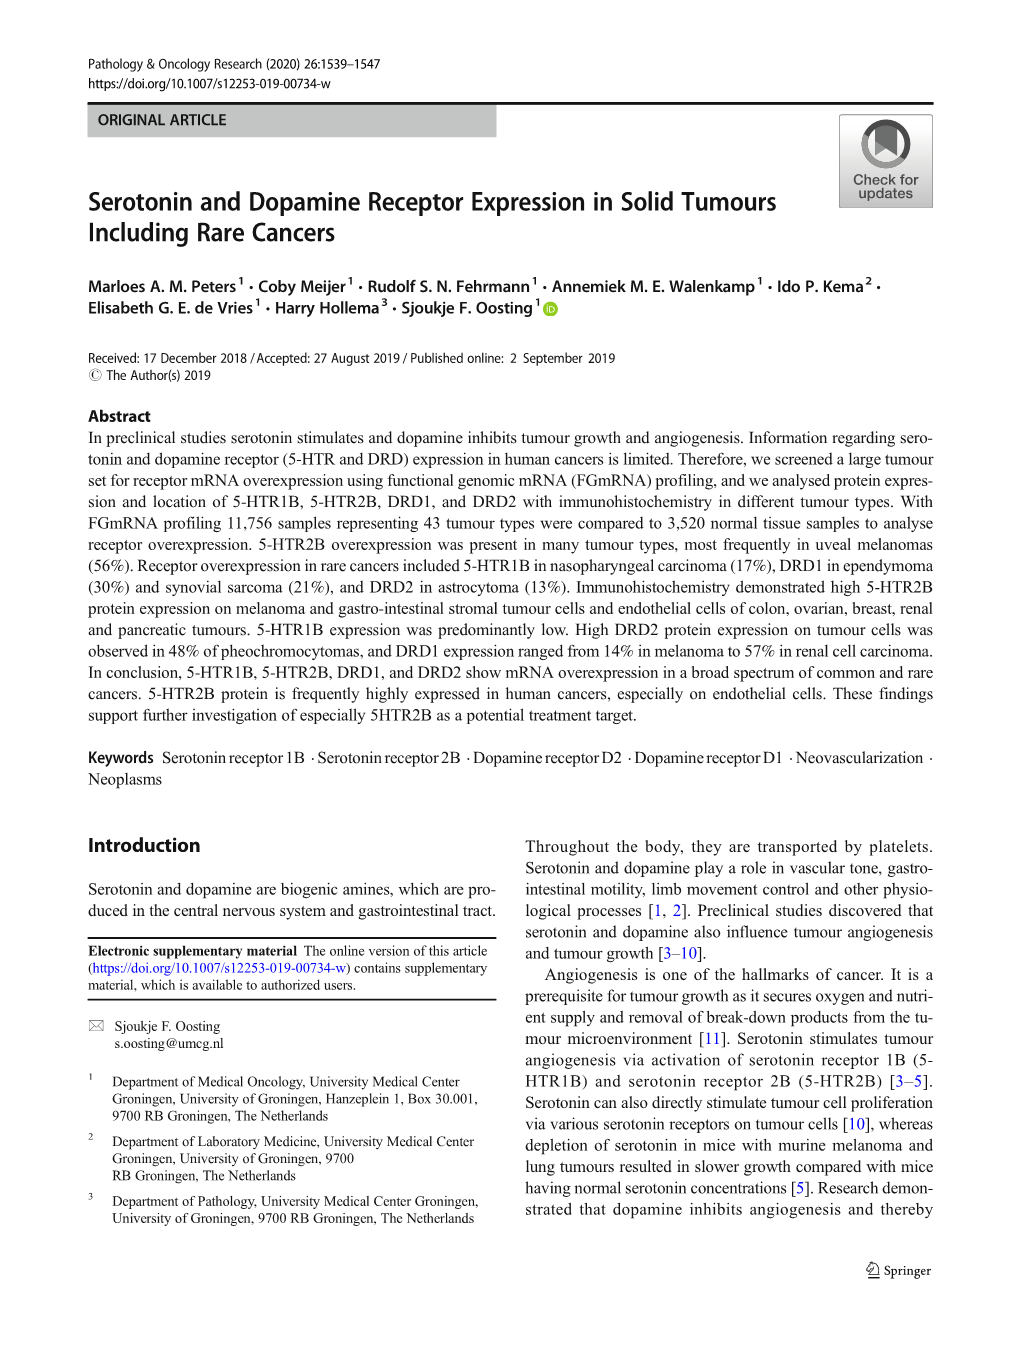 Serotonin and Dopamine Receptor Expression in Solid Tumours Including Rare Cancers